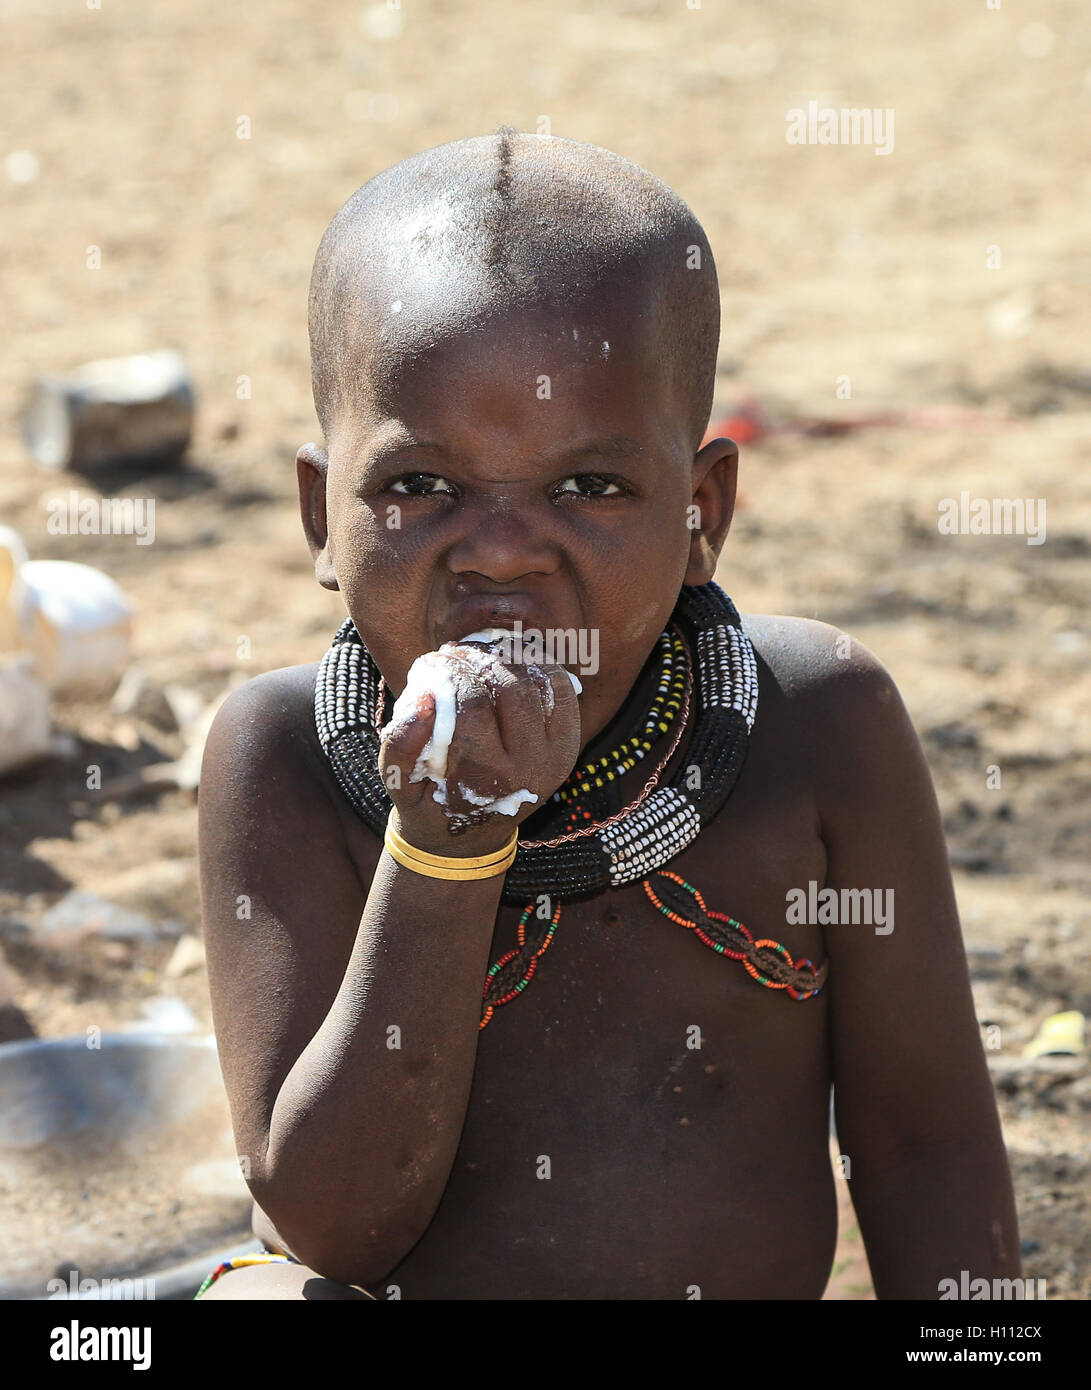 Himba child has a meal made from maize in the Kunene region of Namibia Stock Photo